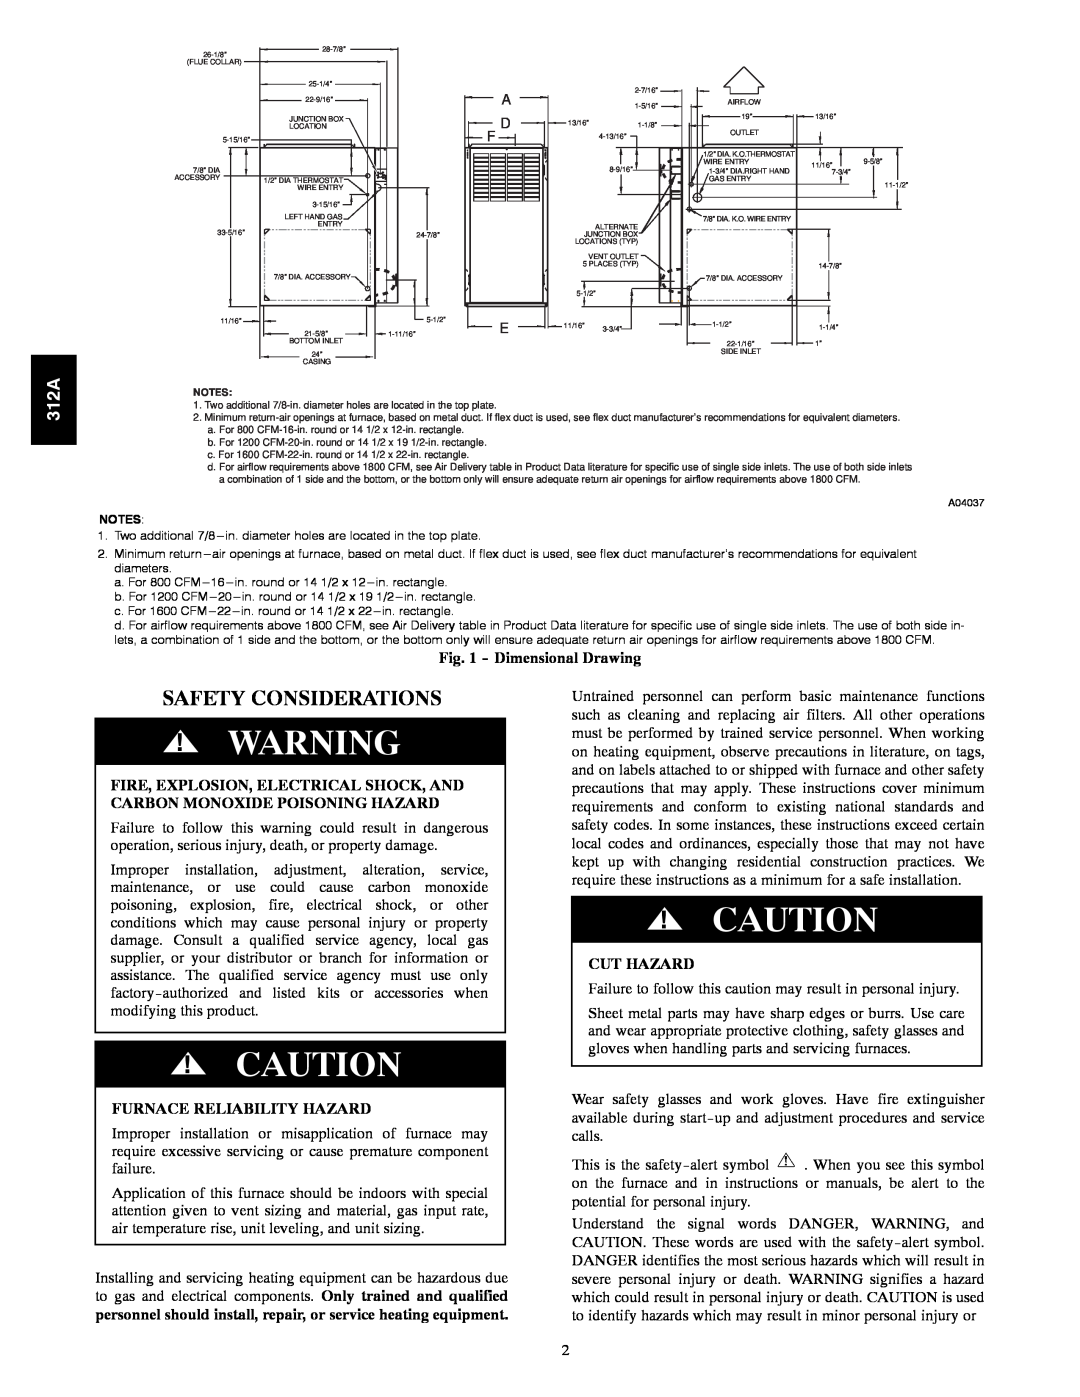 Bryant 120 instruction manual Safety Considerations, 312A, Dimensional Drawing, Furnace Reliability Hazard, Cut Hazard 